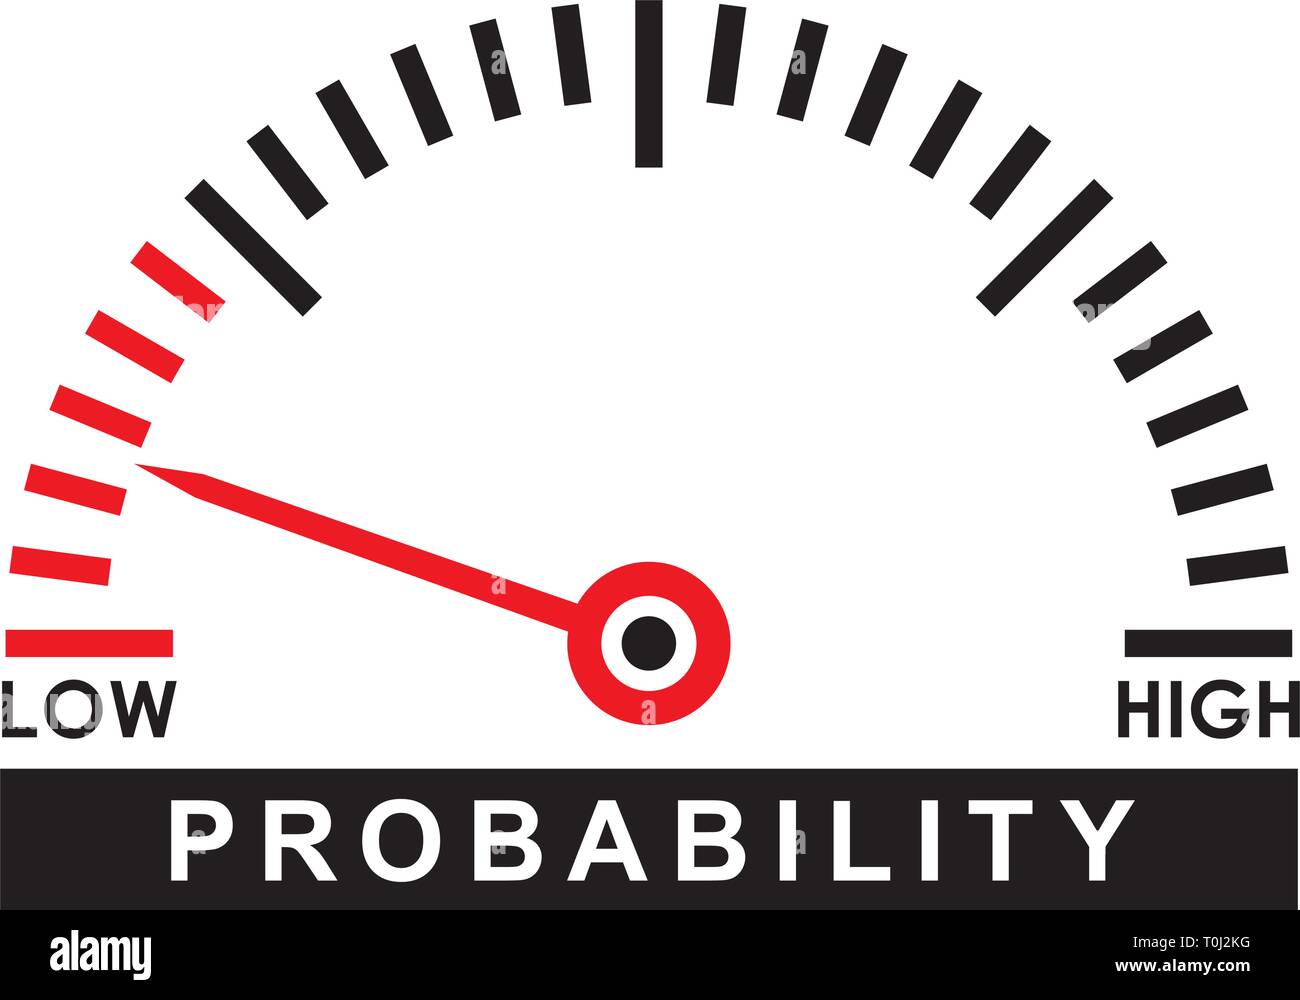 Probability High Resolution Stock Photography and Images - Alamy